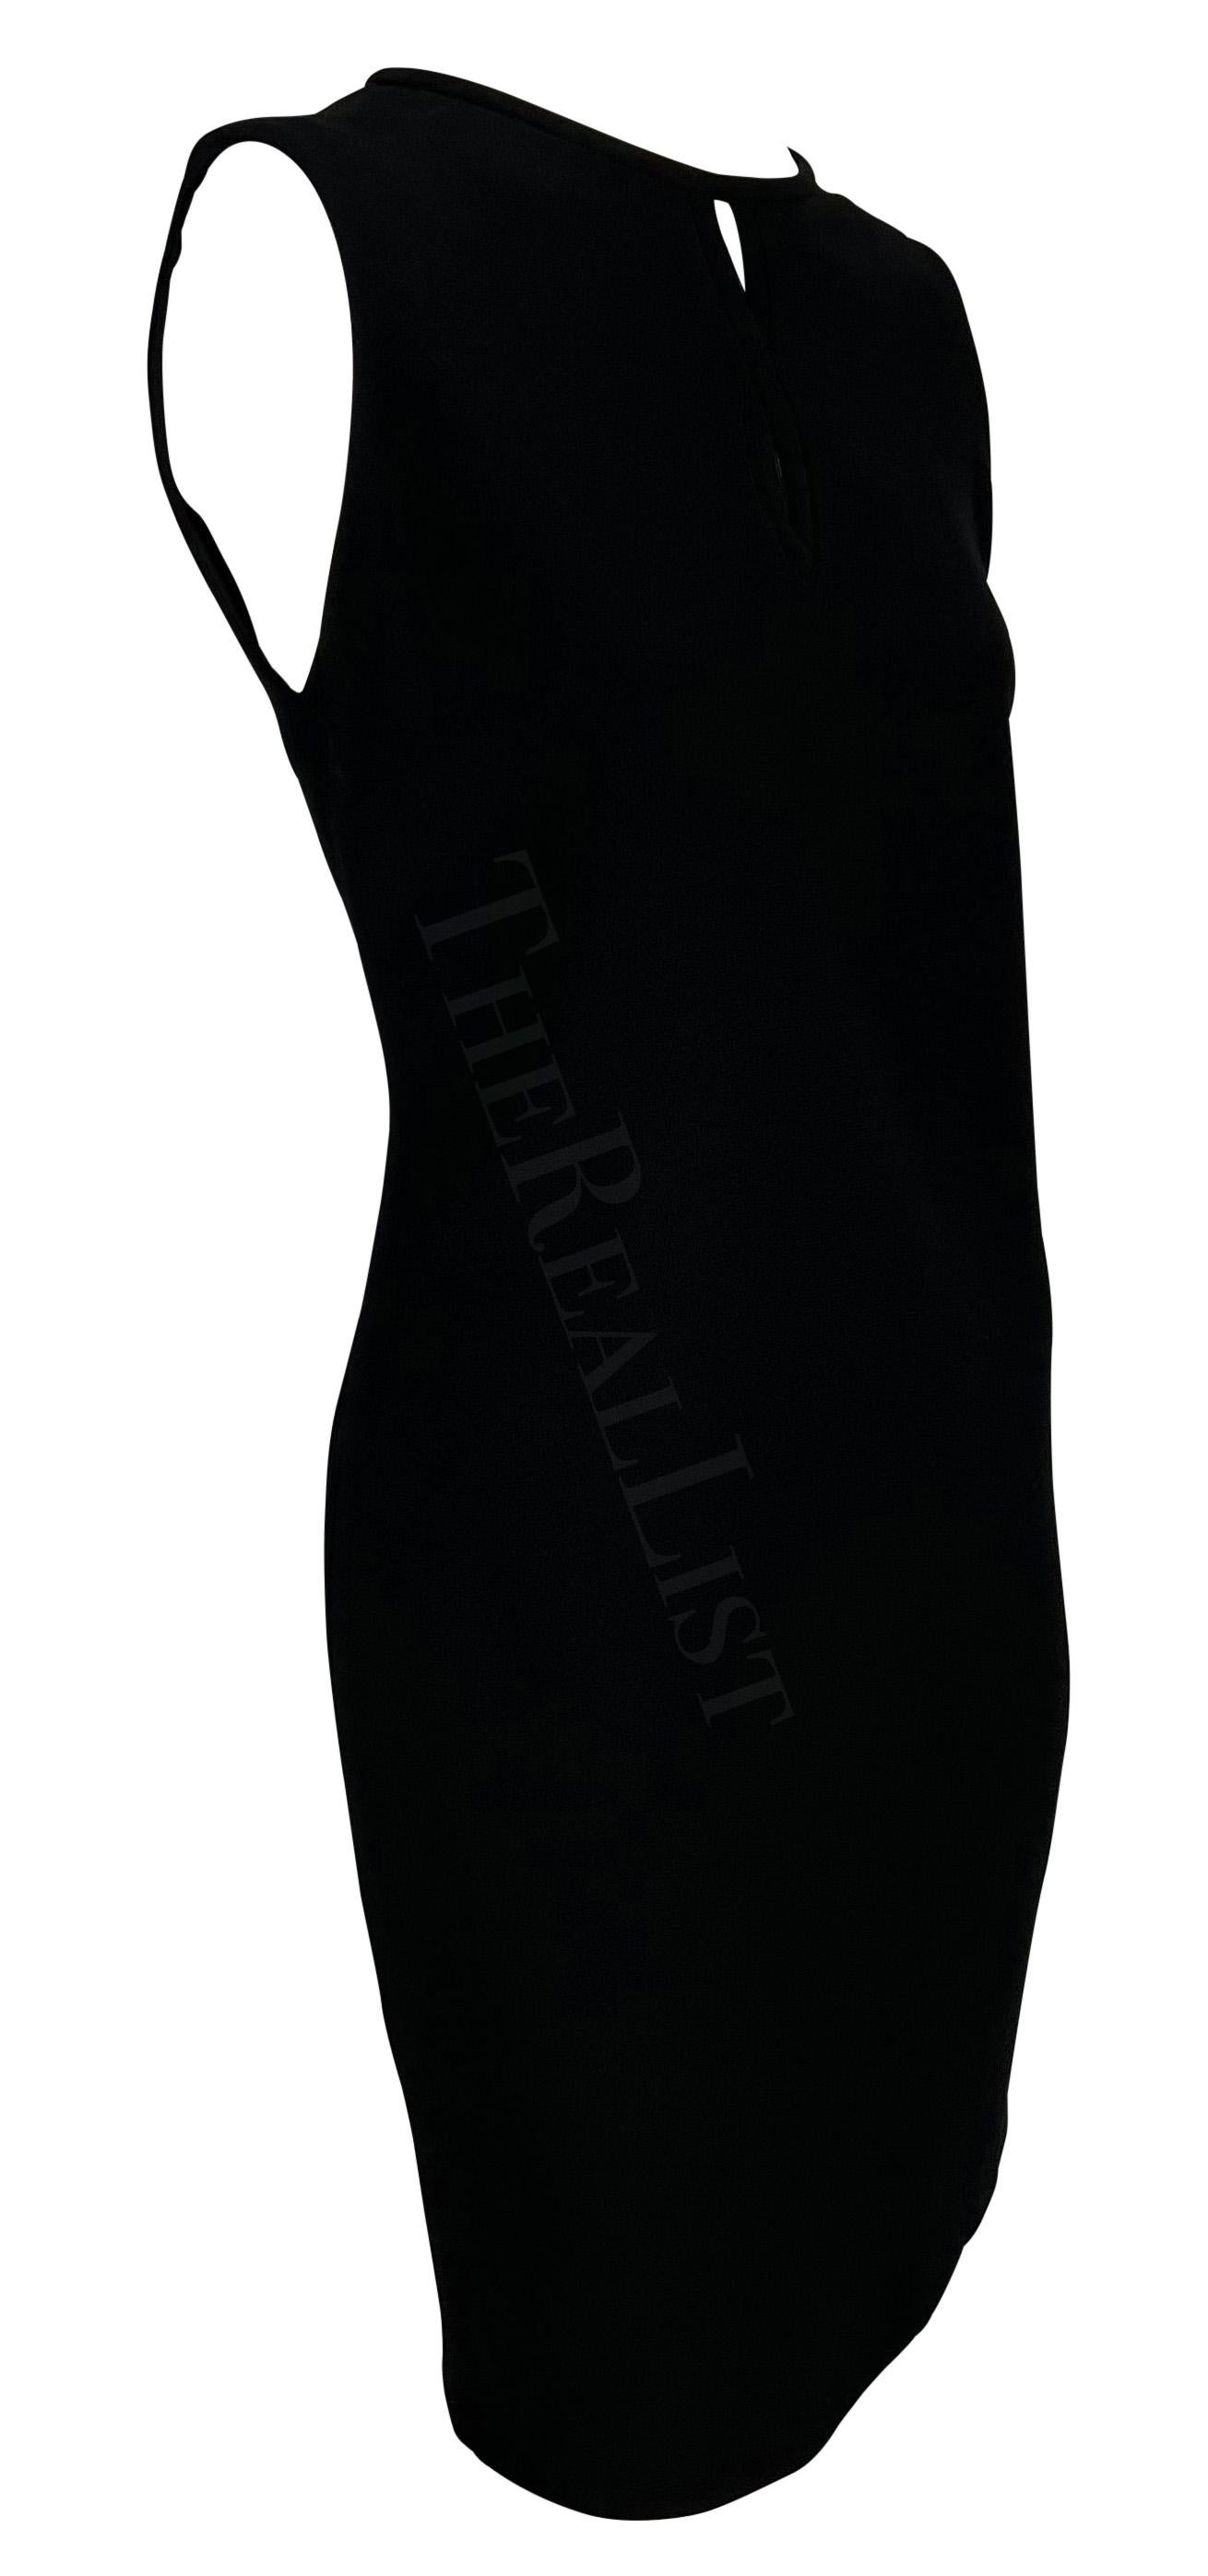 NWT F/W 1997 Gianni Versace Couture Cutout Black Wool Shift Dress For Sale 2